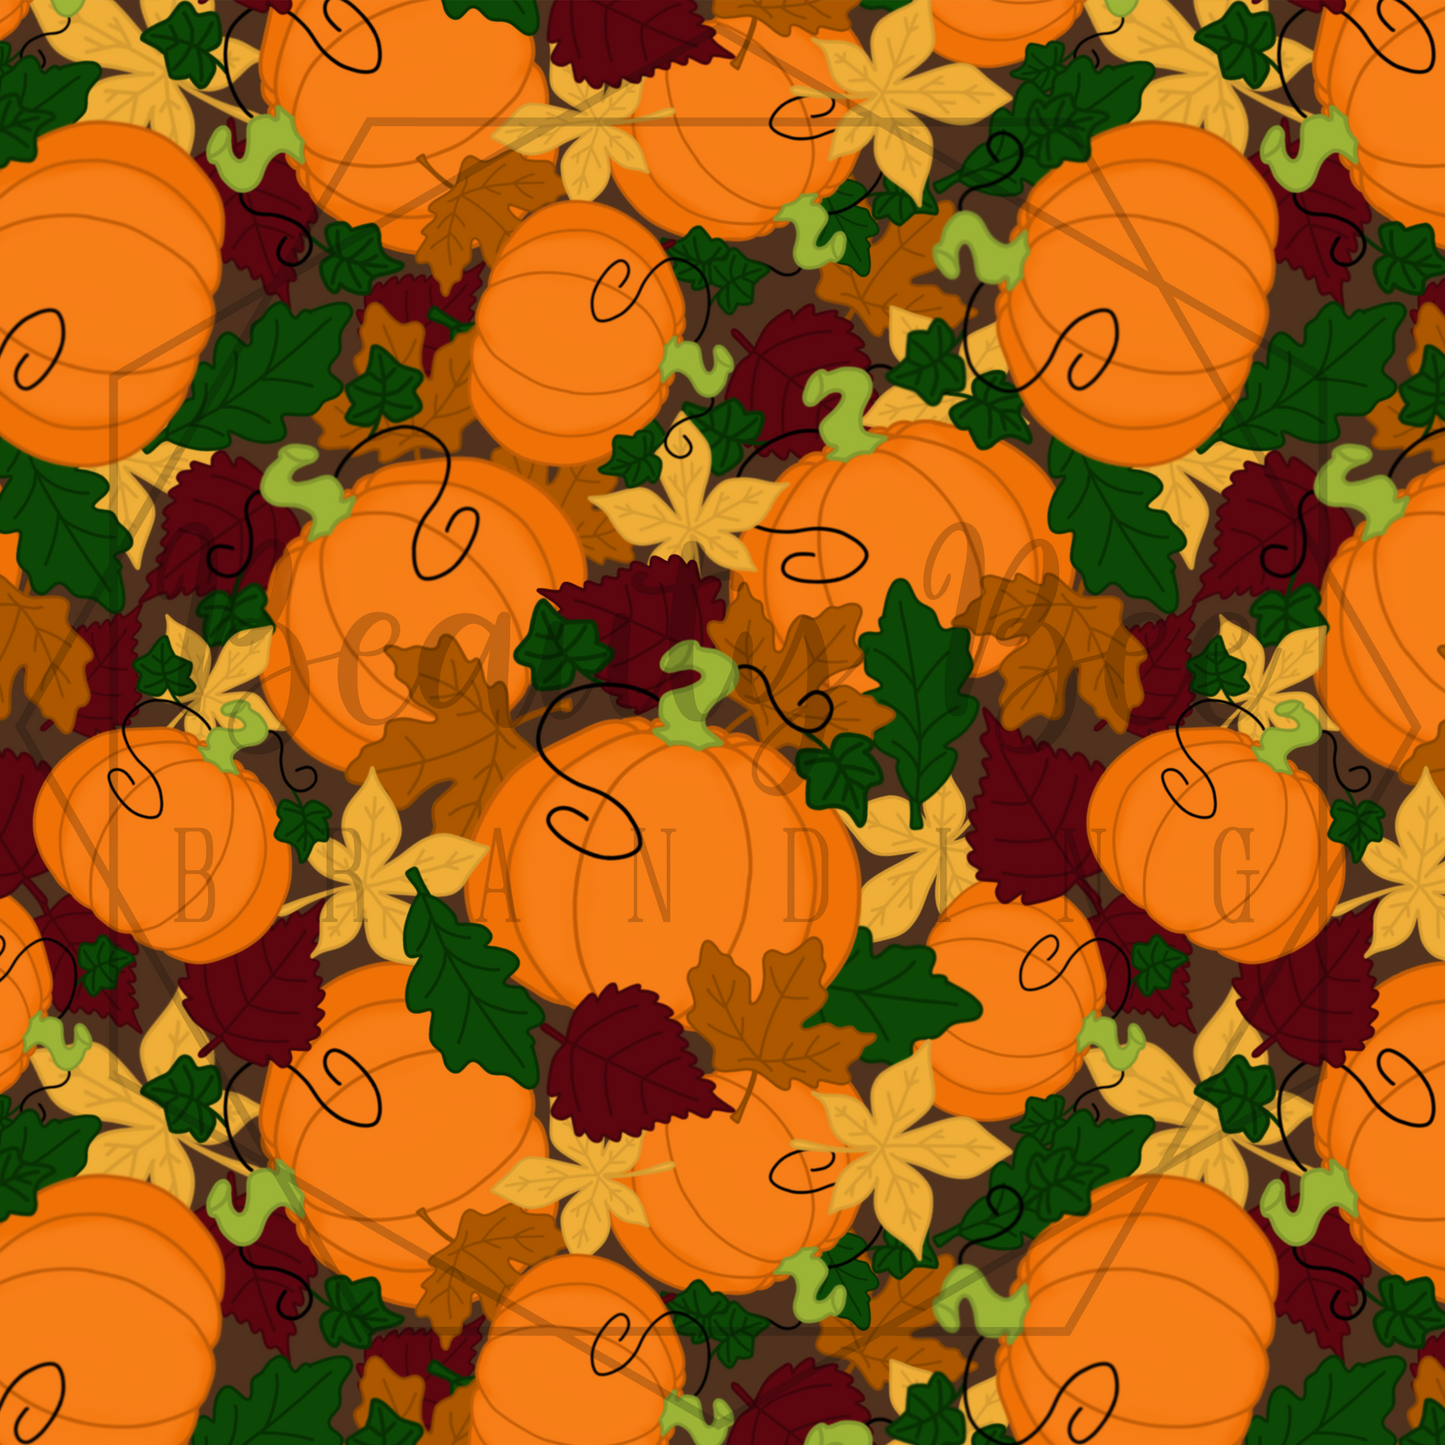 Fall Leaves and Pumpkins SEAMLESS PATTERN